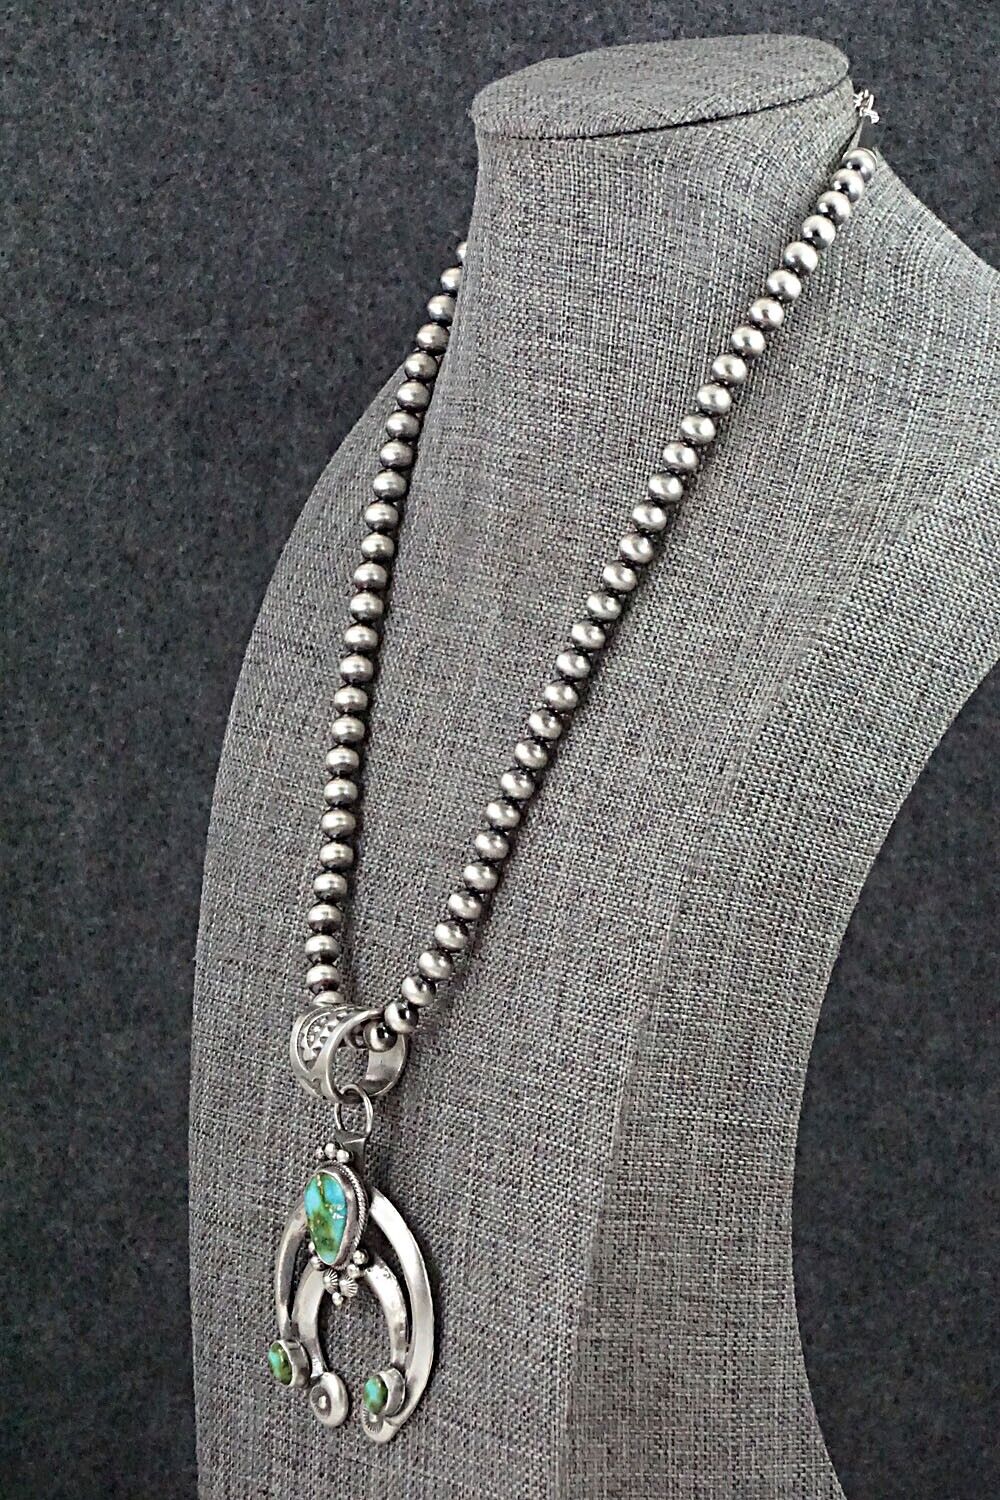 Turquoise & Sterling Silver Necklace - Paige Gordon